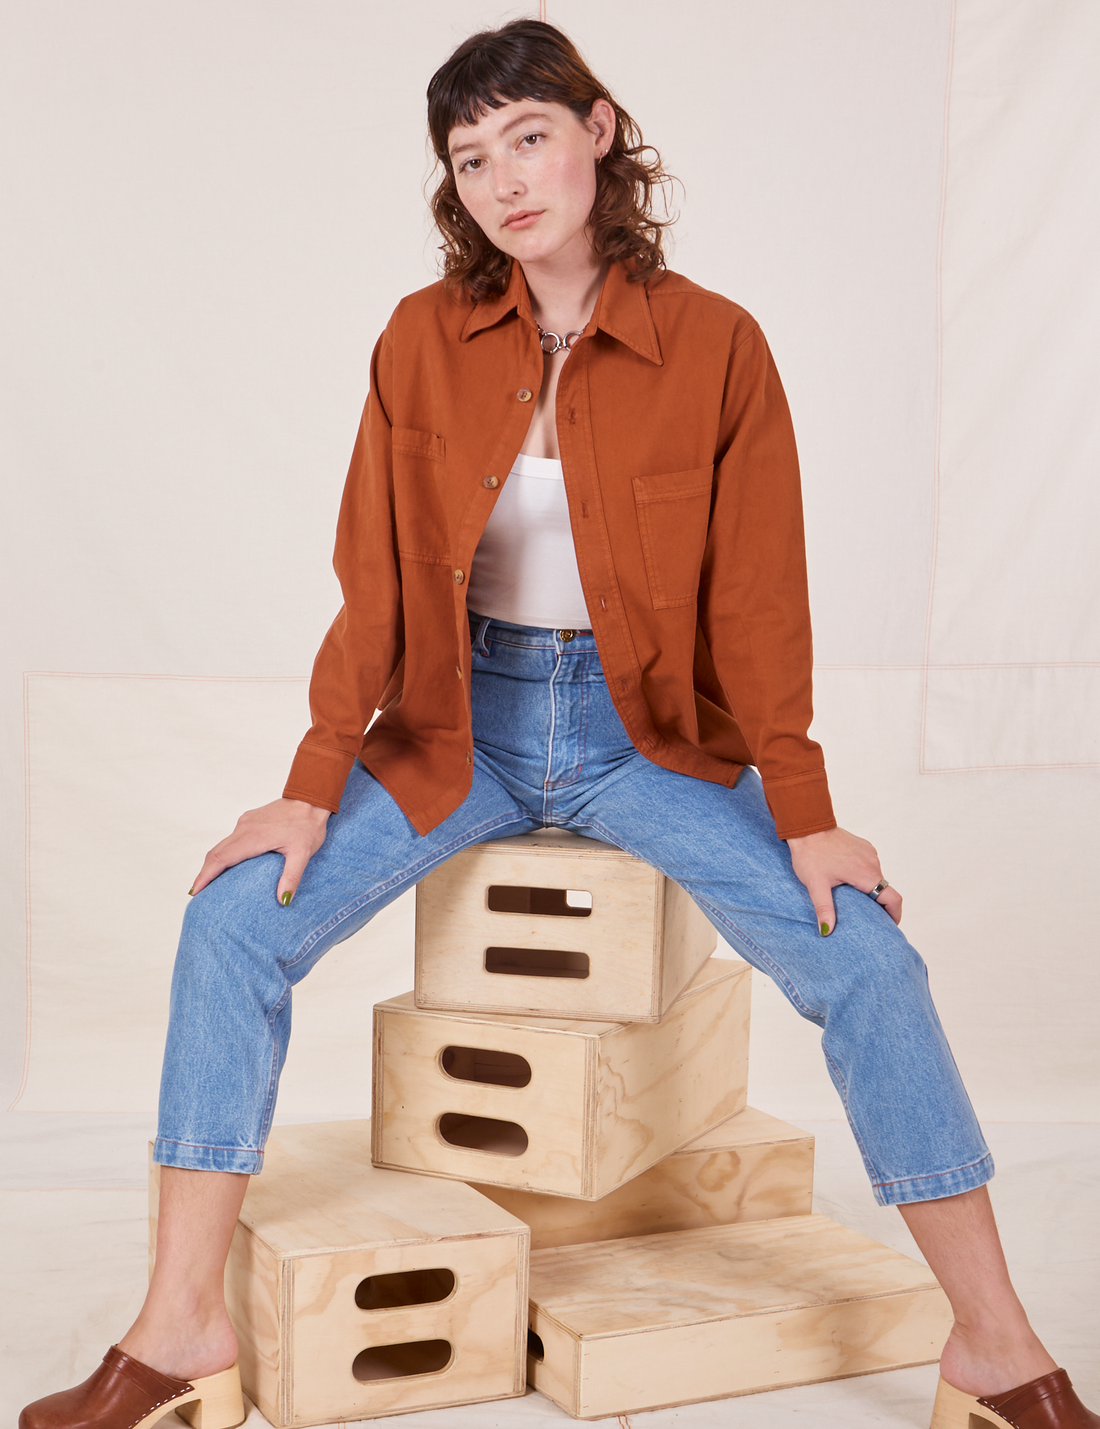 Alex is wearing Oversize Overshirt in Burnt Terracotta, vintage off-white Cropped Tank Top and light wash Frontier Jeans